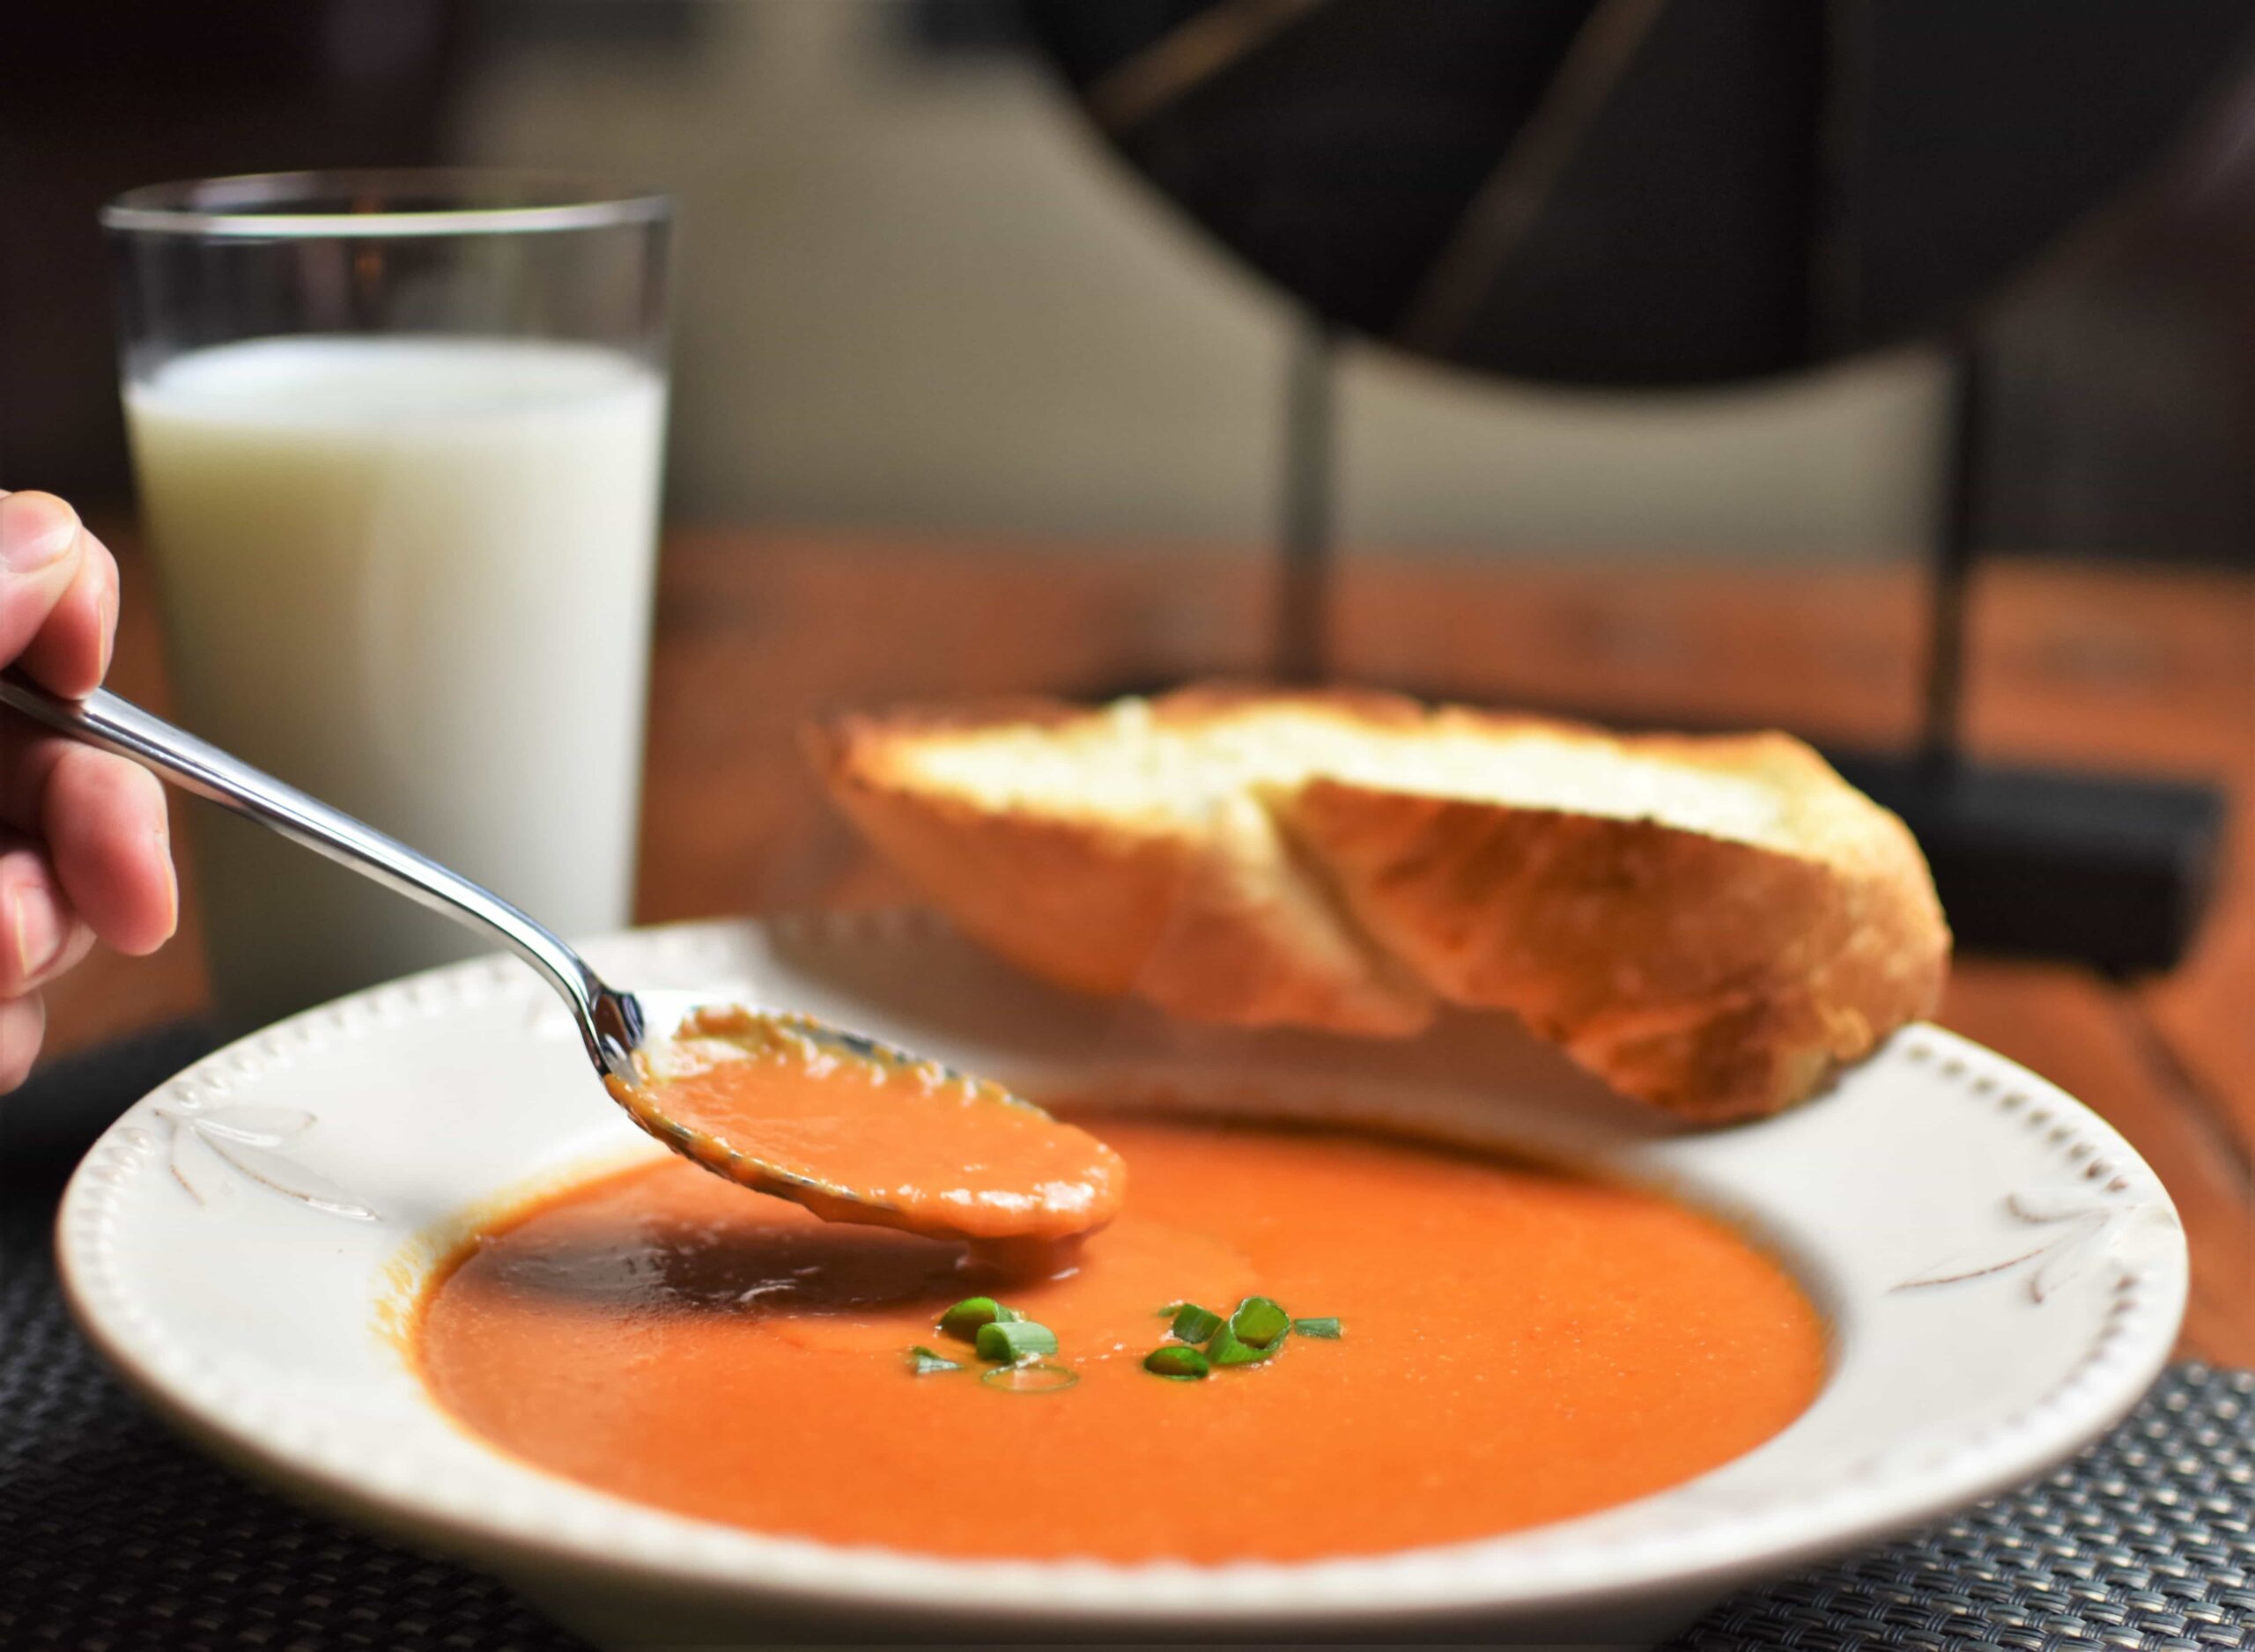 Creamy Tomato Soup with Spoon